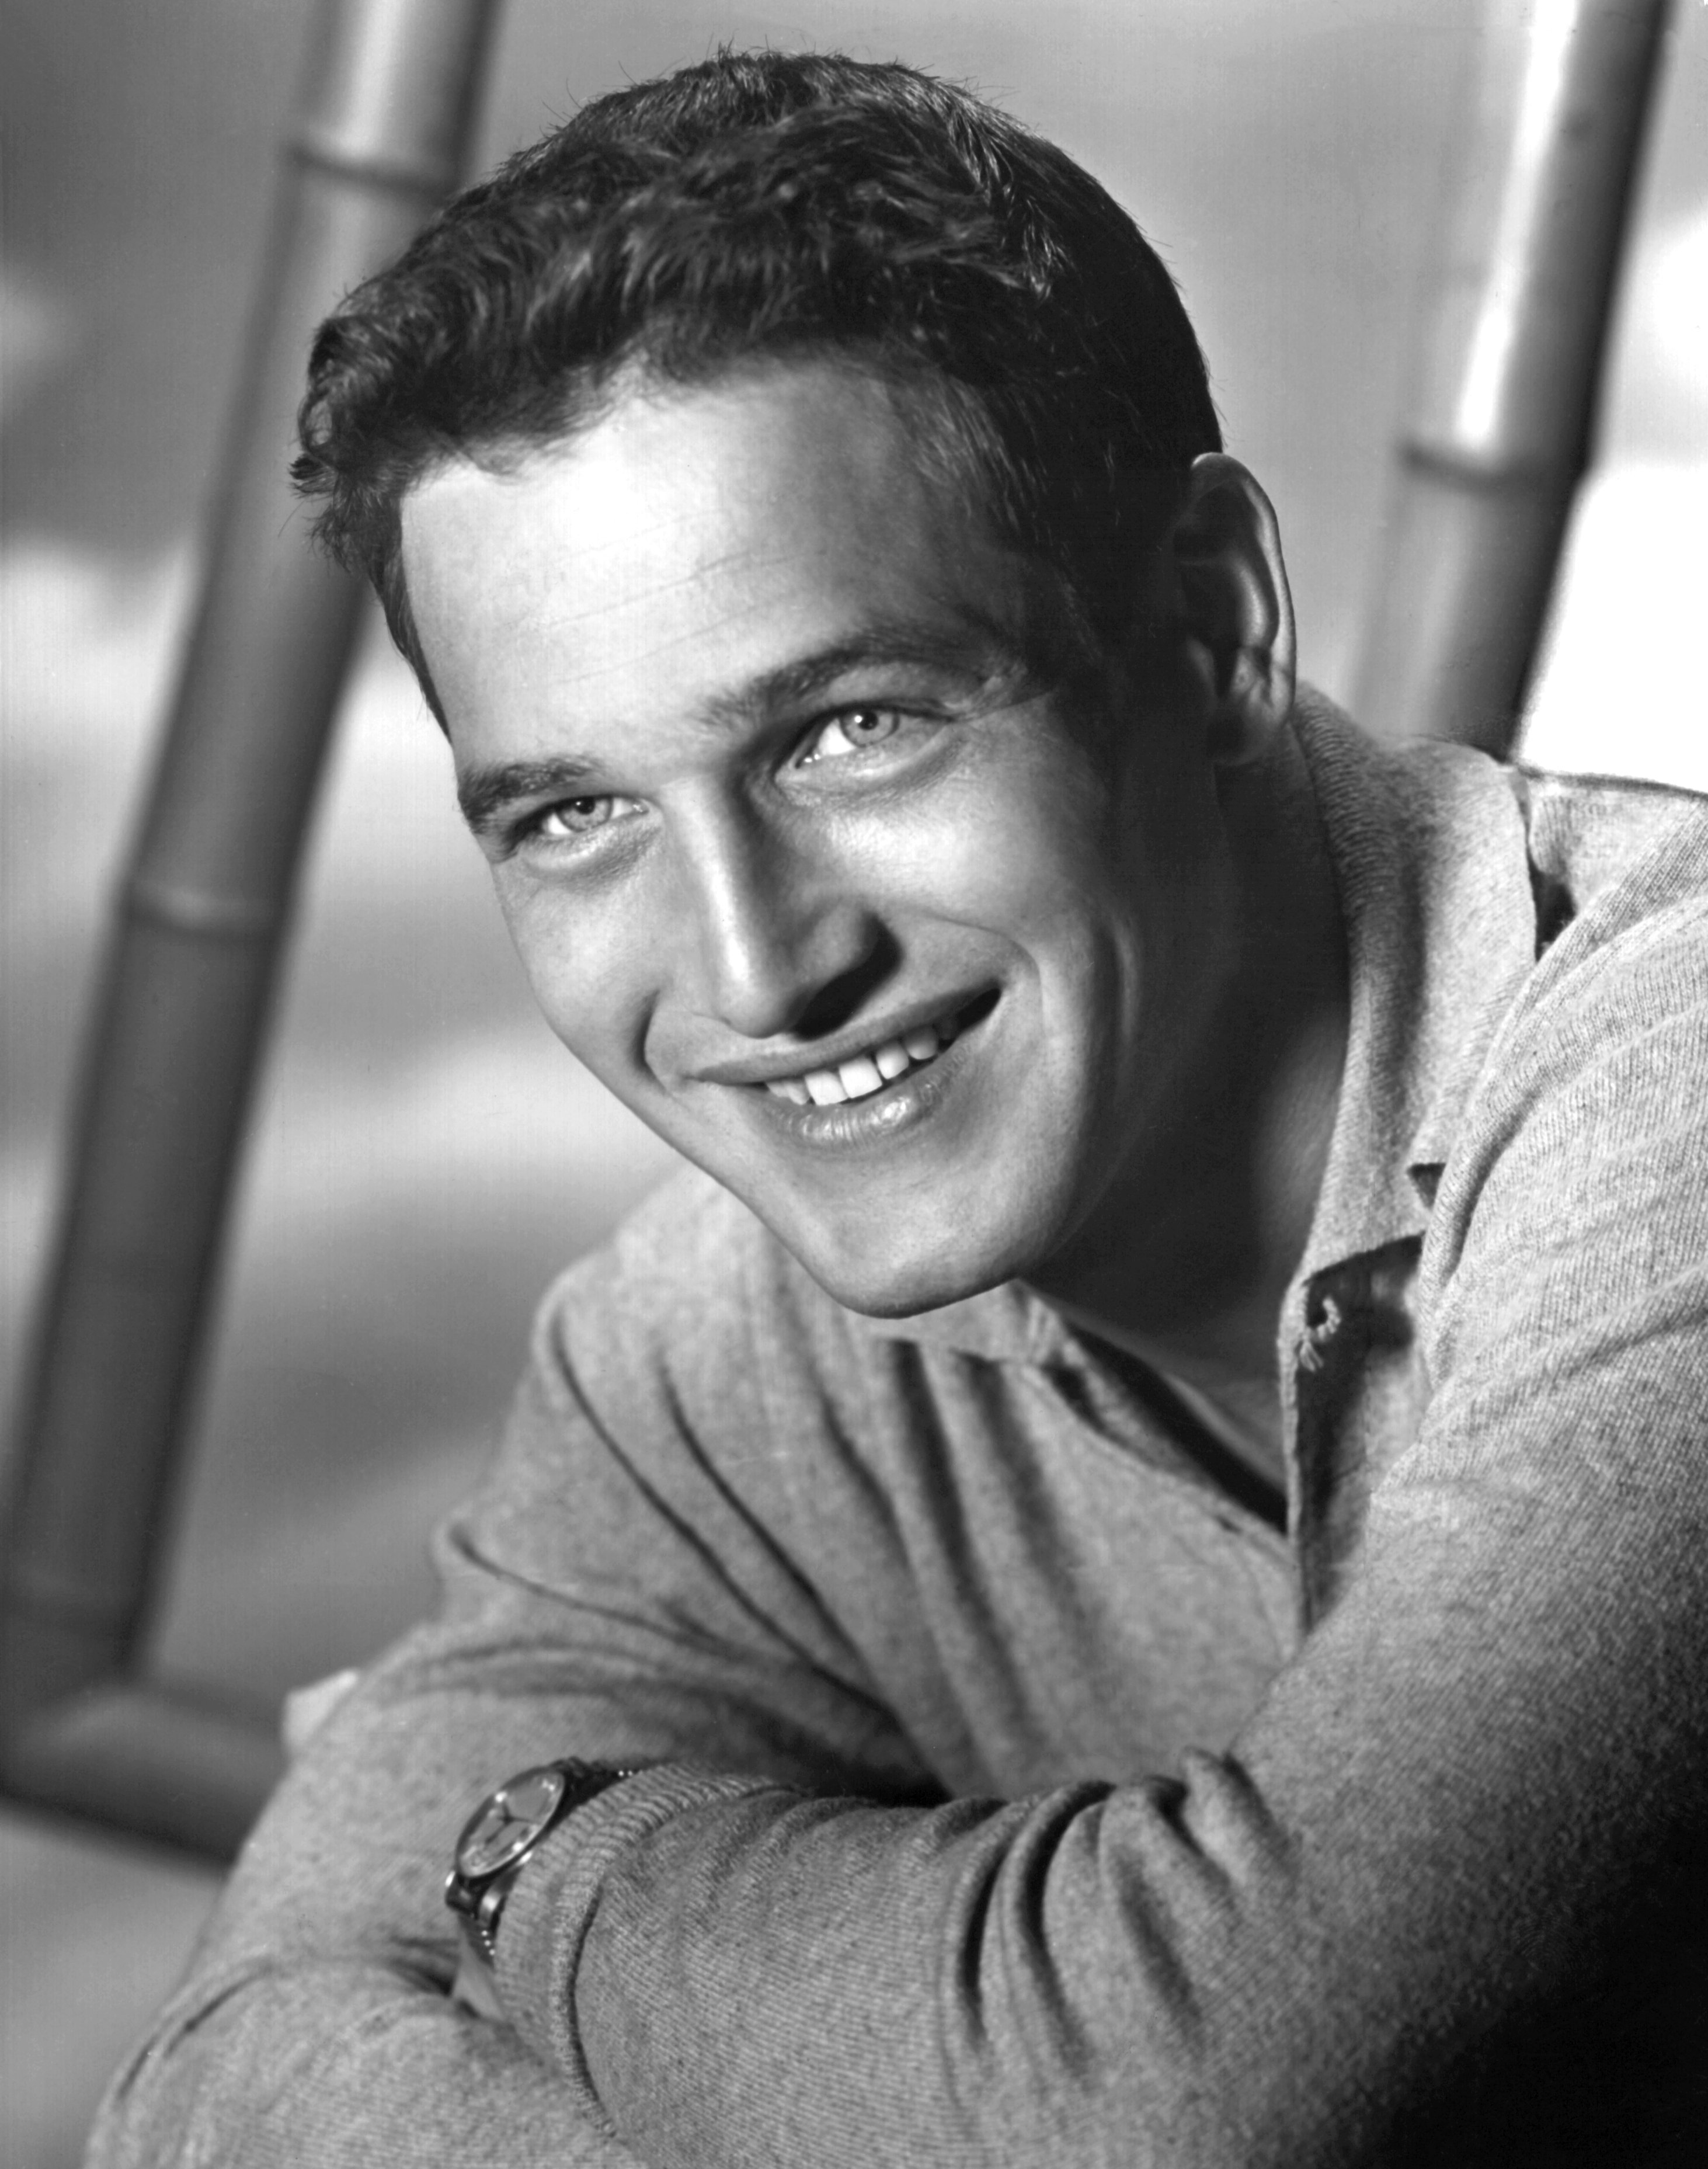 Paul Newman photo 82 of 96 pics, wallpaper - photo #364420 - ThePlace2